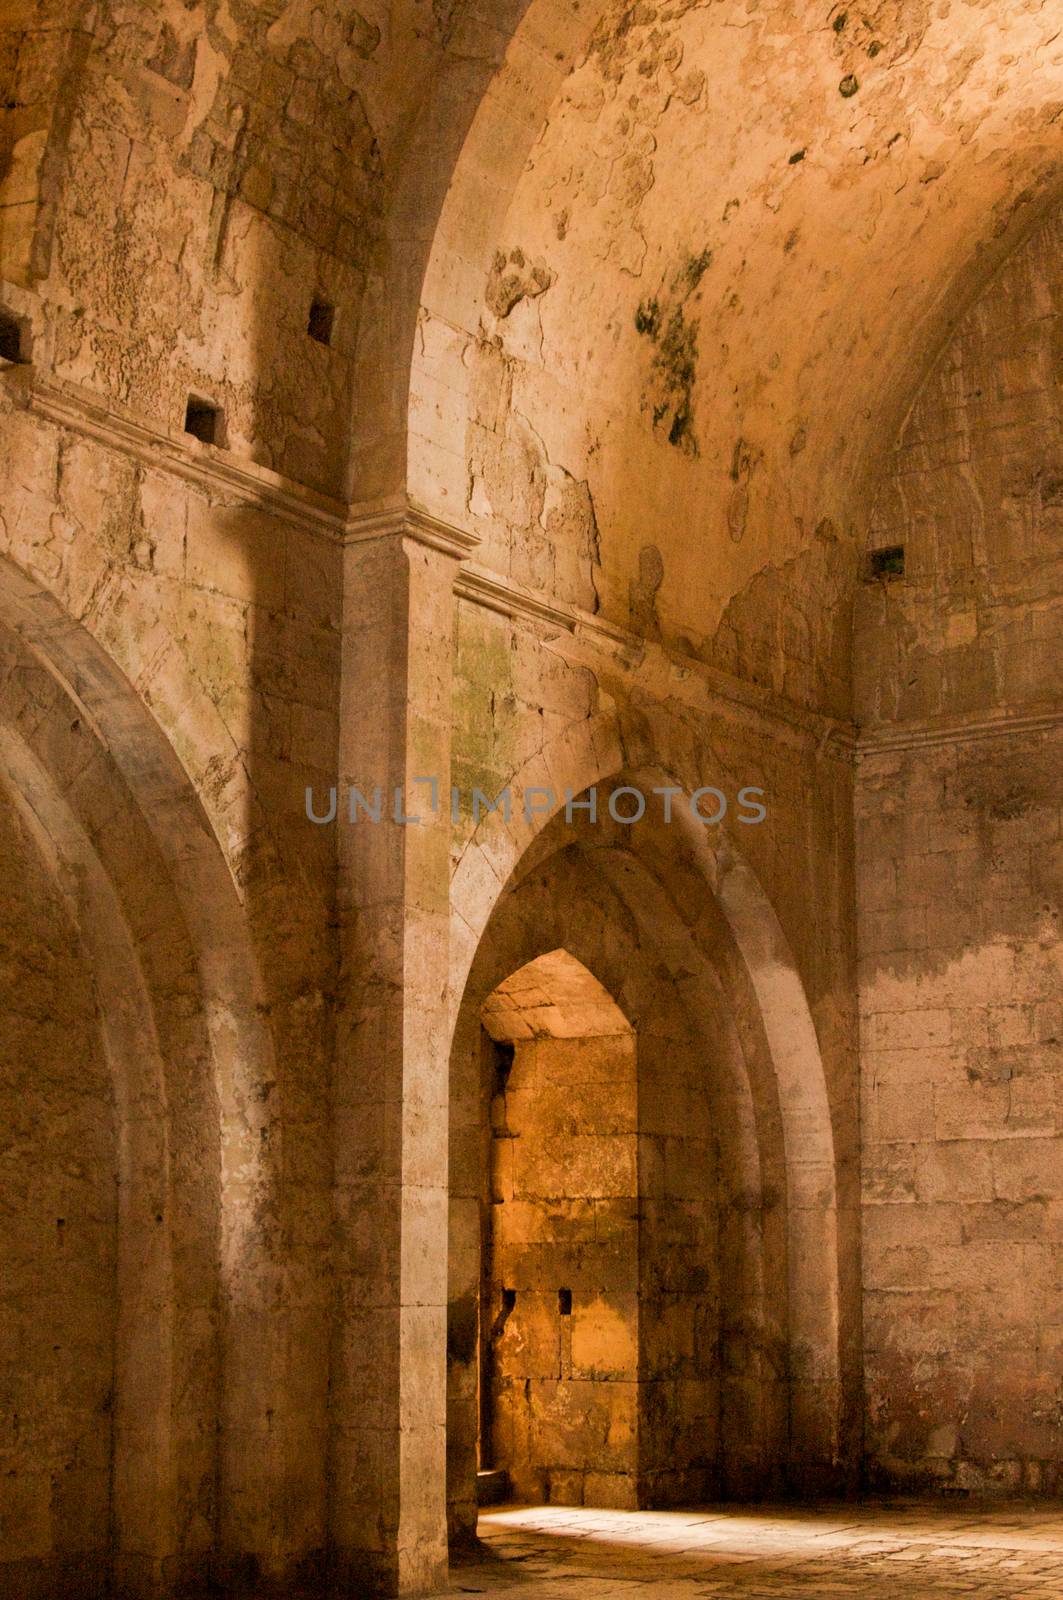 Crac de chevalier Syria 2009 interior the best-preserved of the Crusader castles by kgboxford